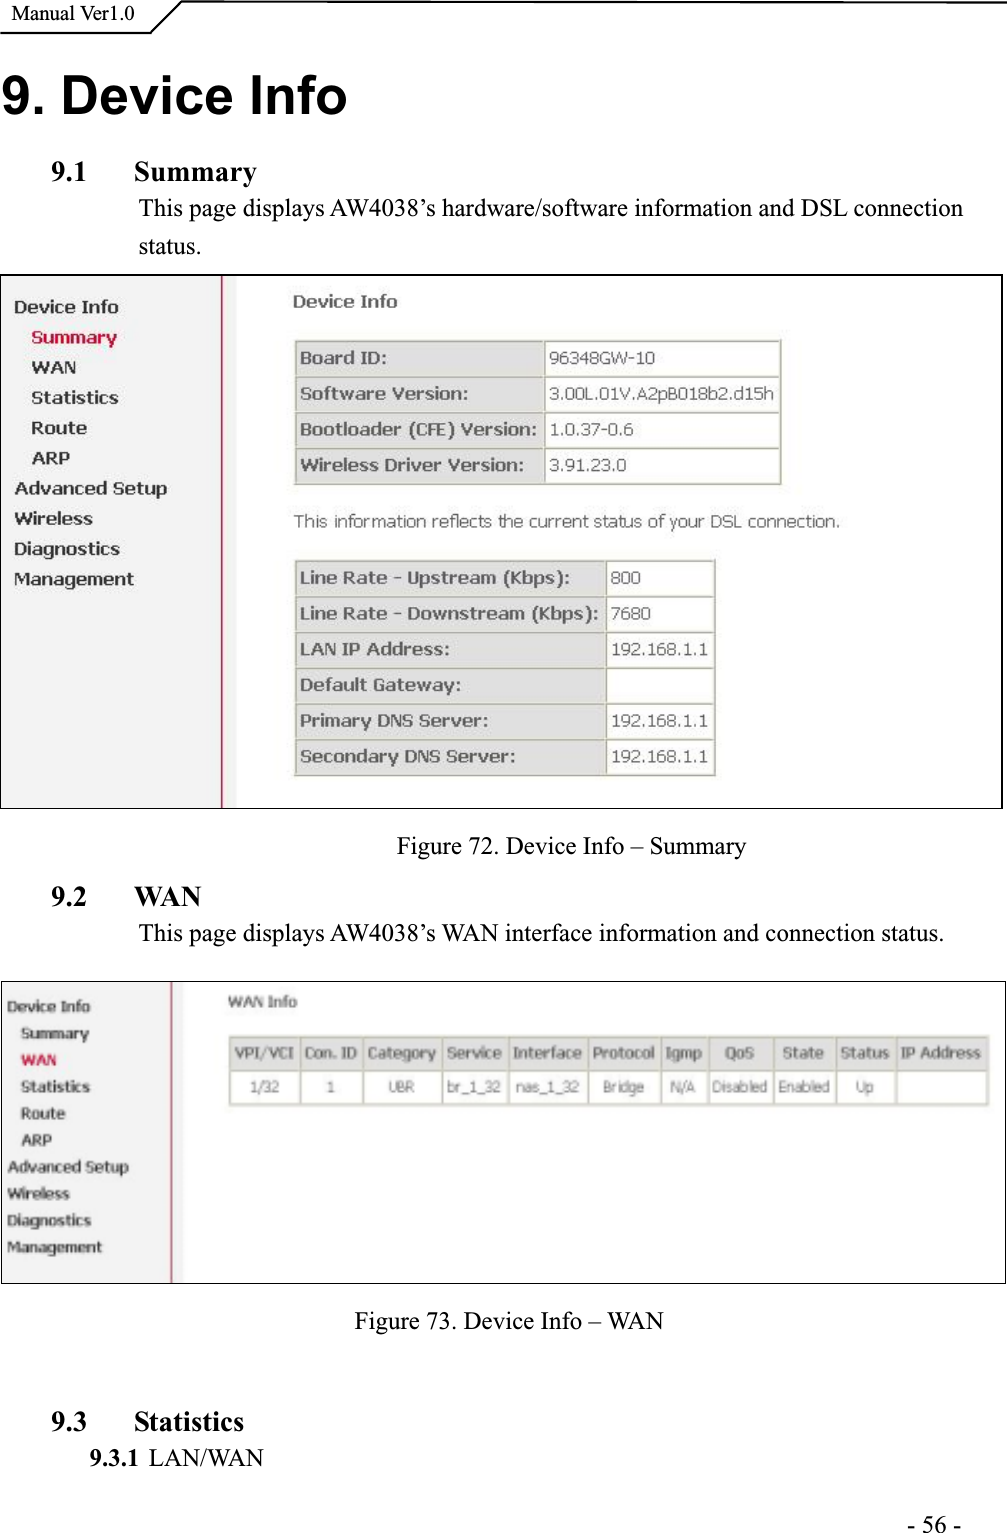  Manual Ver1.09. Device Info9.1 Summary This page displays AW4038’s hardware/software information and DSL connection status.Figure 72. Device Info – Summary9.2 WANThis page displays AW4038’s WAN interface information and connection status. Figure 73. Device Info – WAN9.3 Statistics9.3.1 LAN/WAN                                                                     -56-